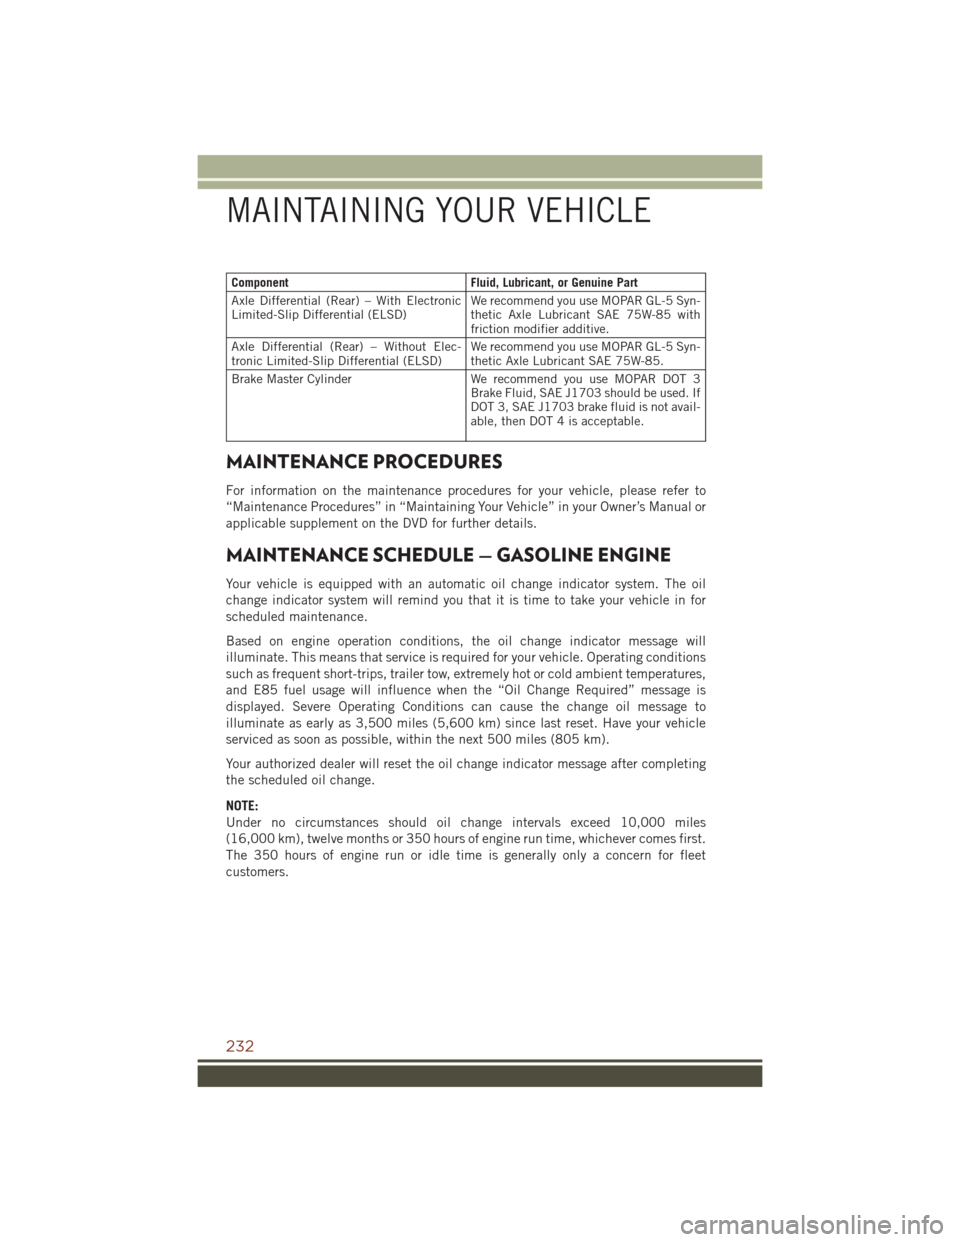 JEEP GRAND CHEROKEE 2016 WK2 / 4.G User Guide ComponentFluid, Lubricant, or Genuine Part
Axle Differential (Rear) – With Electronic
Limited-Slip Differential (ELSD) We recommend you use MOPAR GL-5 Syn-
thetic Axle Lubricant SAE 75W-85 with
fric